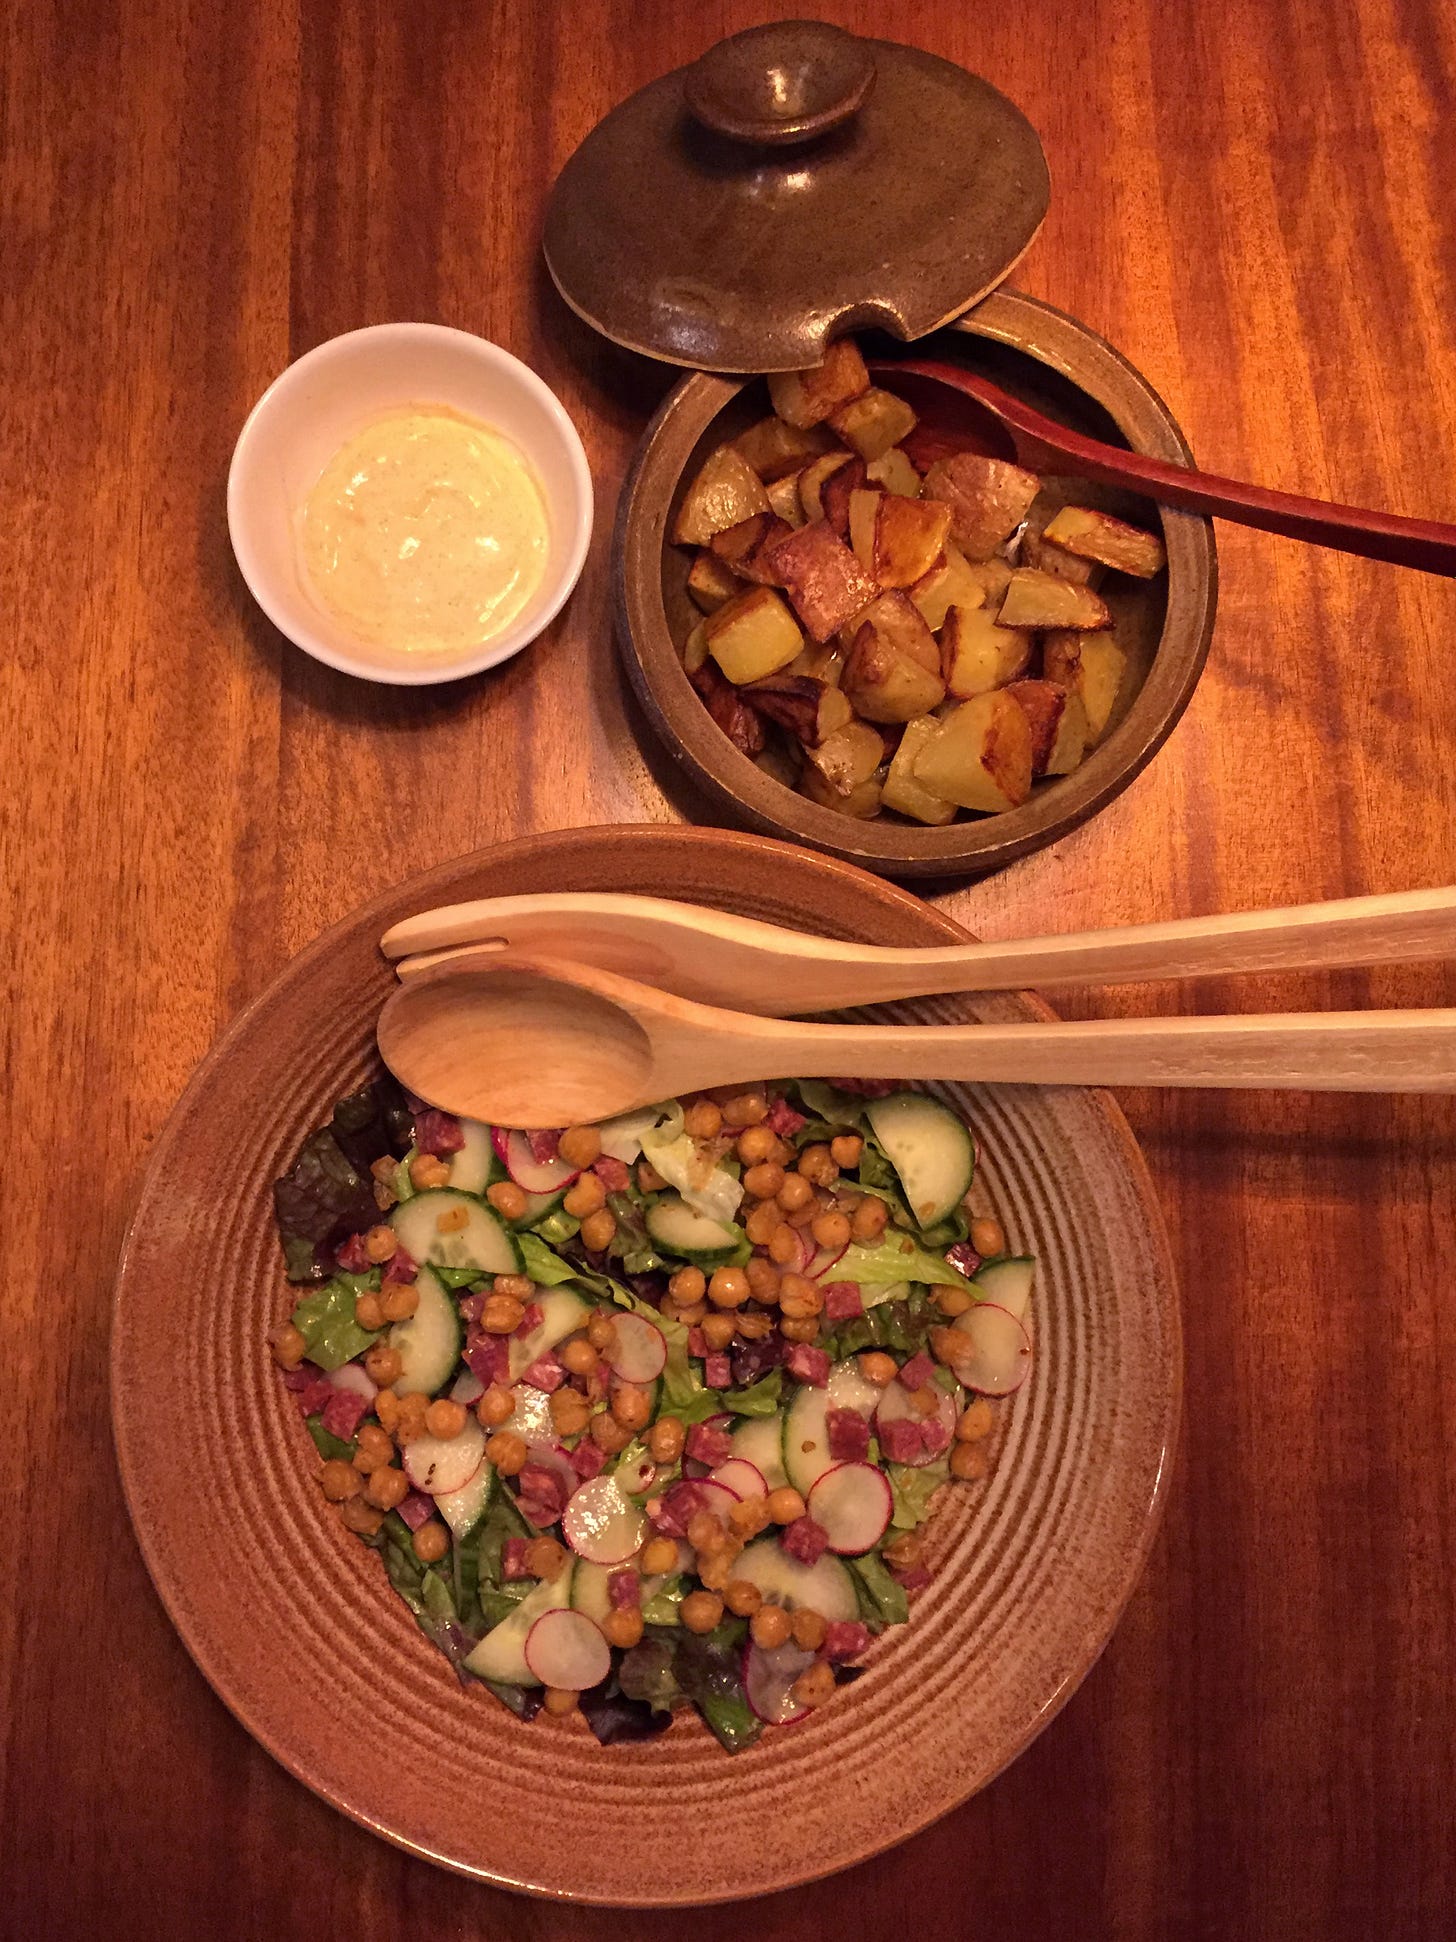 From above, a large ceramic bowl full of green salad with chickpeas and small cubes of salami, with slices of radish and cucumber. Above it is a small tureen filled with browned potatoe pieces, with the lid and a spoon resting at the edge of the dish. Beside this is a small white bowl of the paprika-garlic mayo.